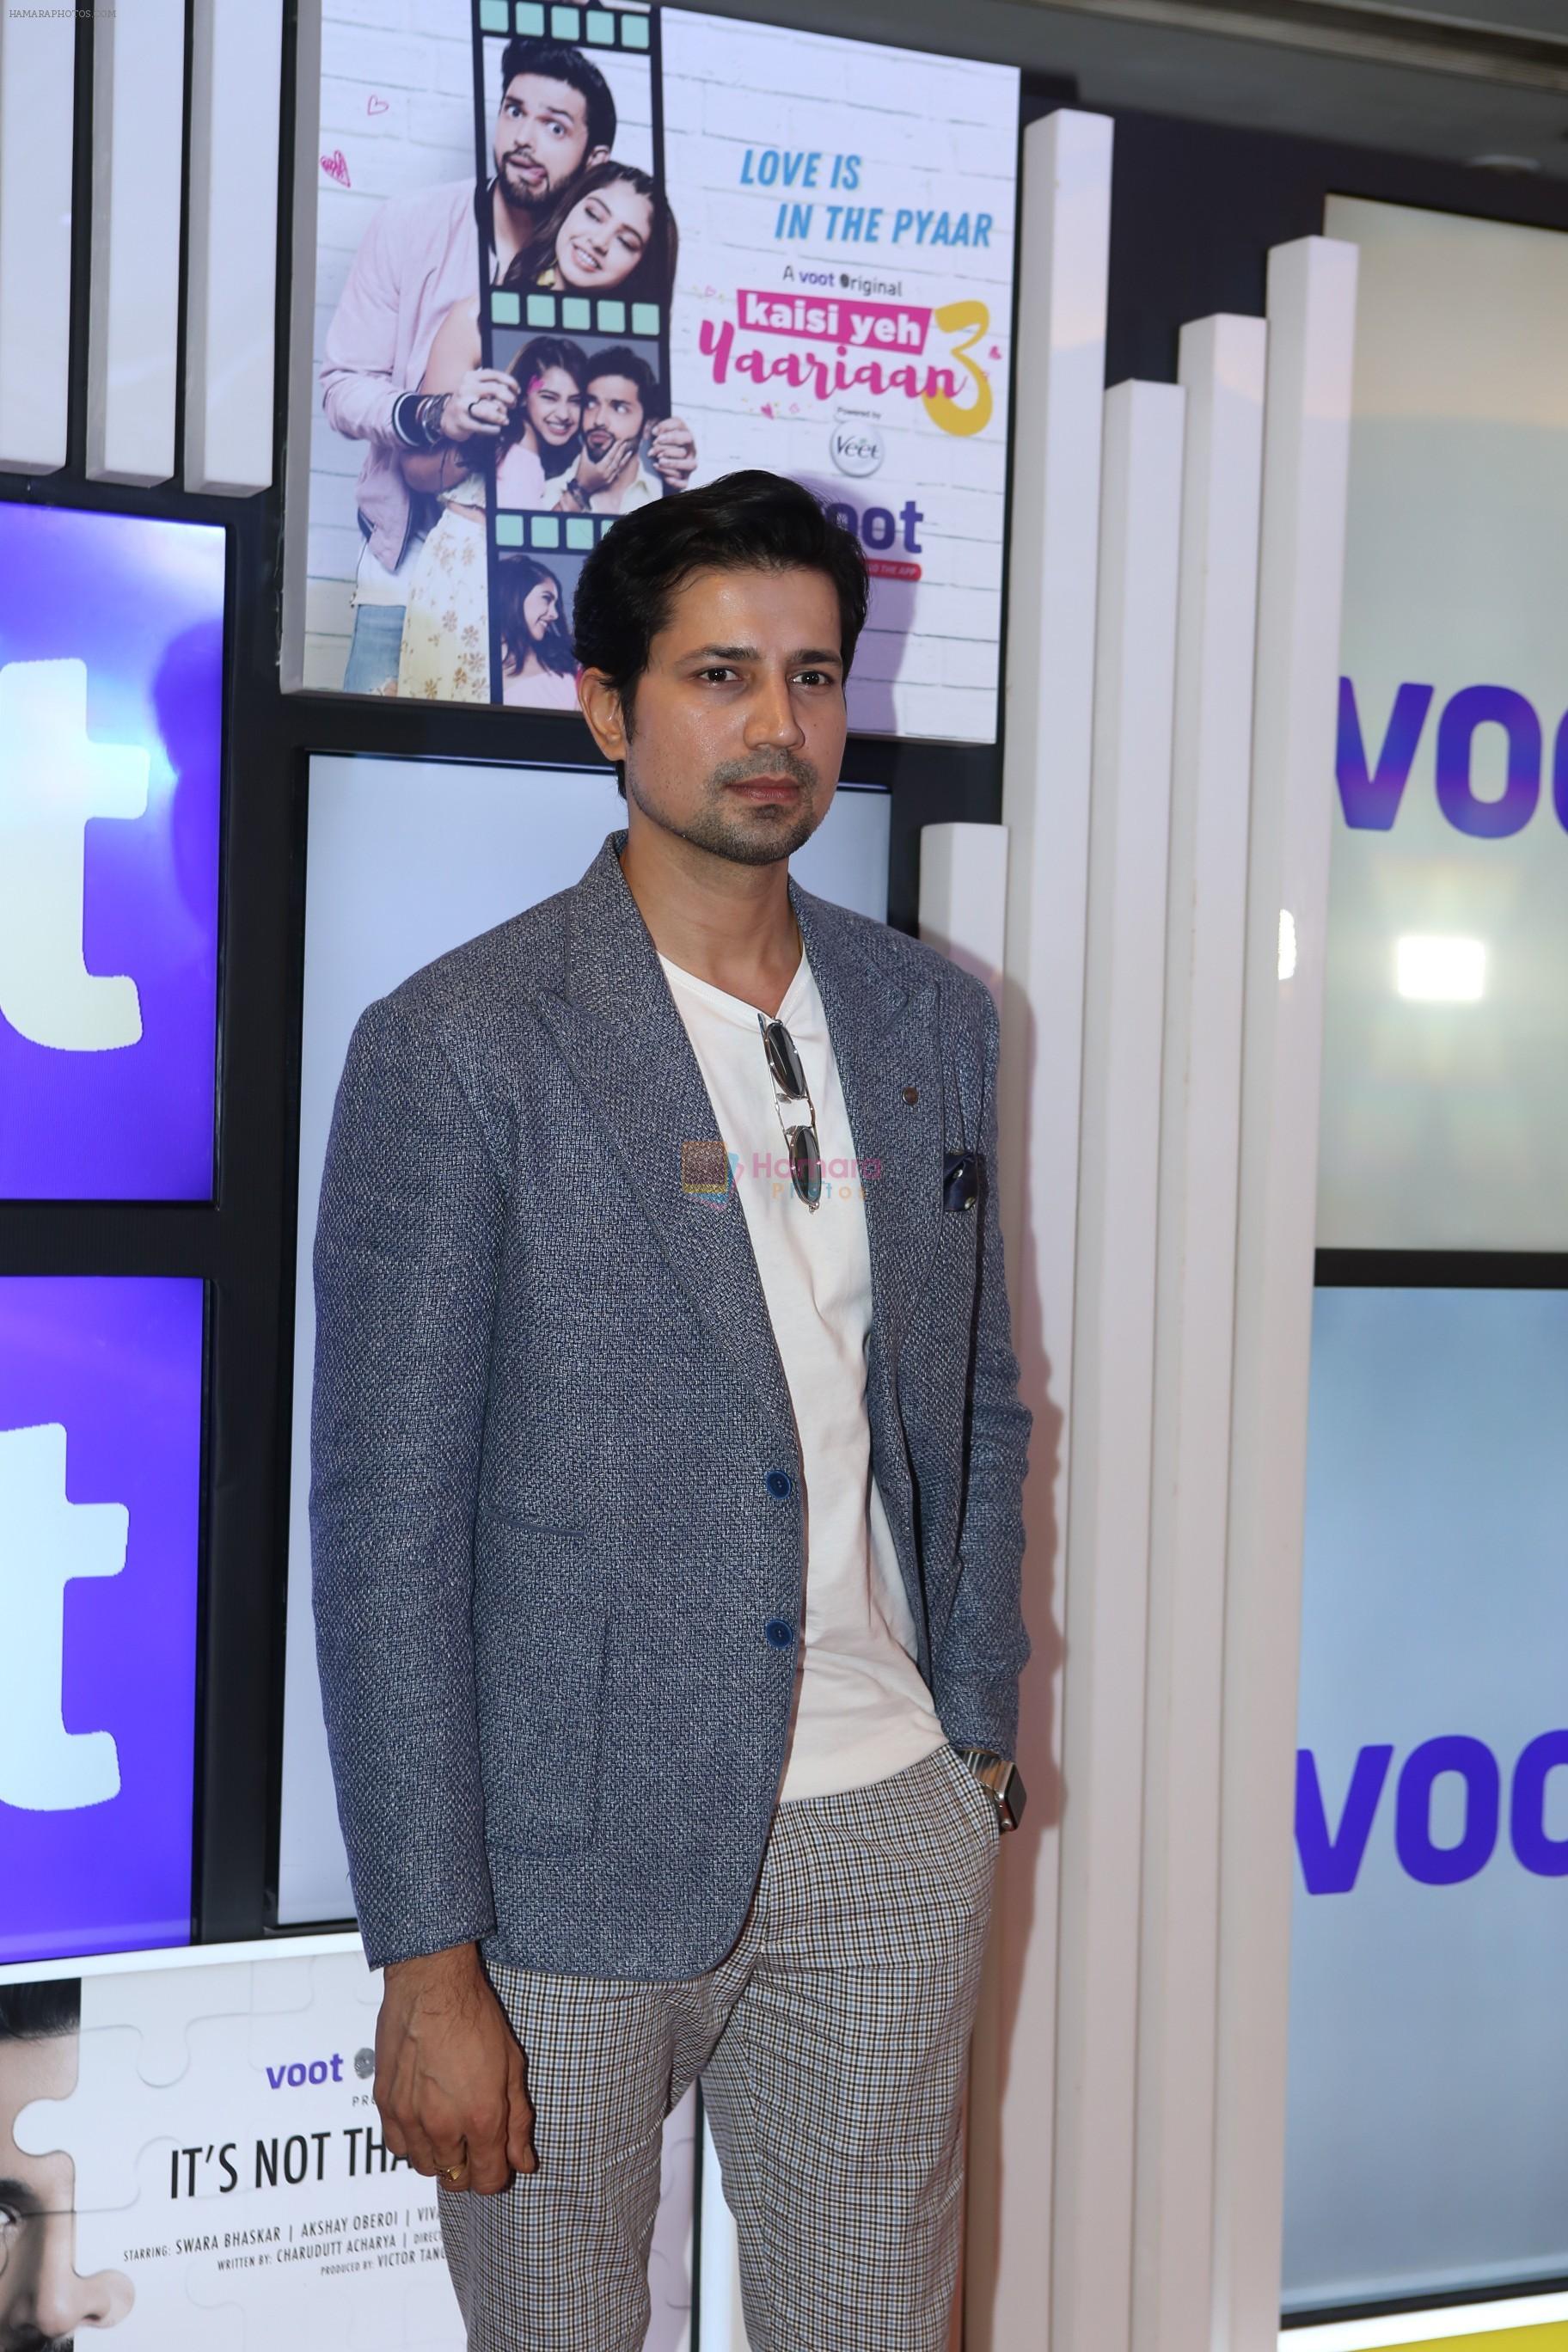 Sumeet Vyas at Voot press conference in ITC Grand Maratha, Andheri on 30th AUg 2018